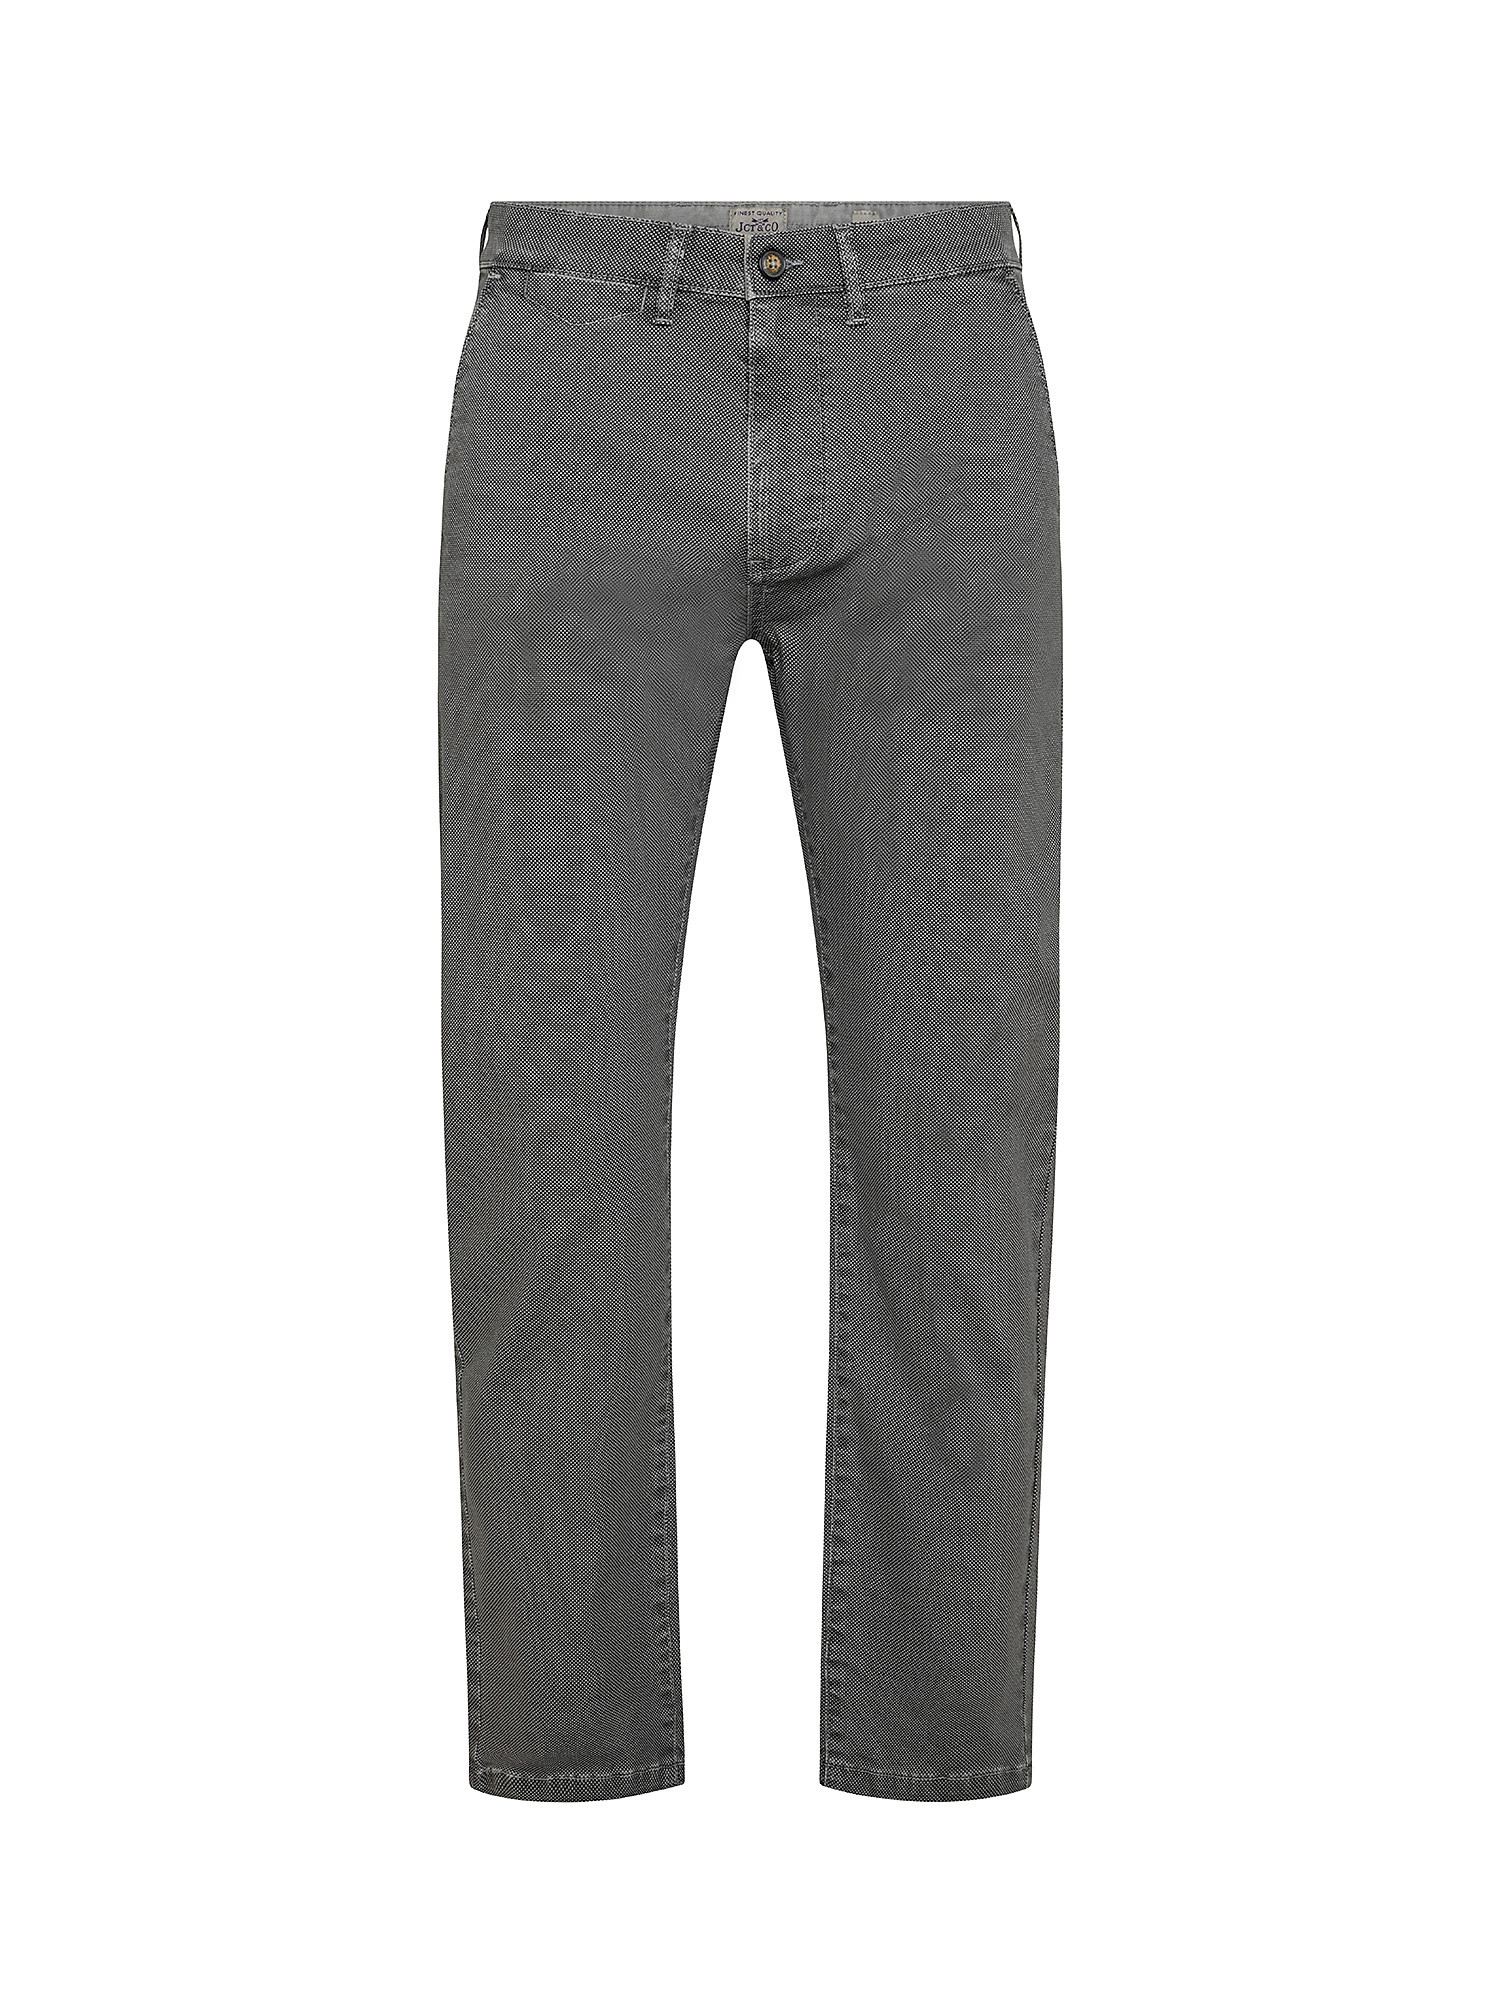 Pantalone chinos in cotone stretch, Grigio, large image number 0